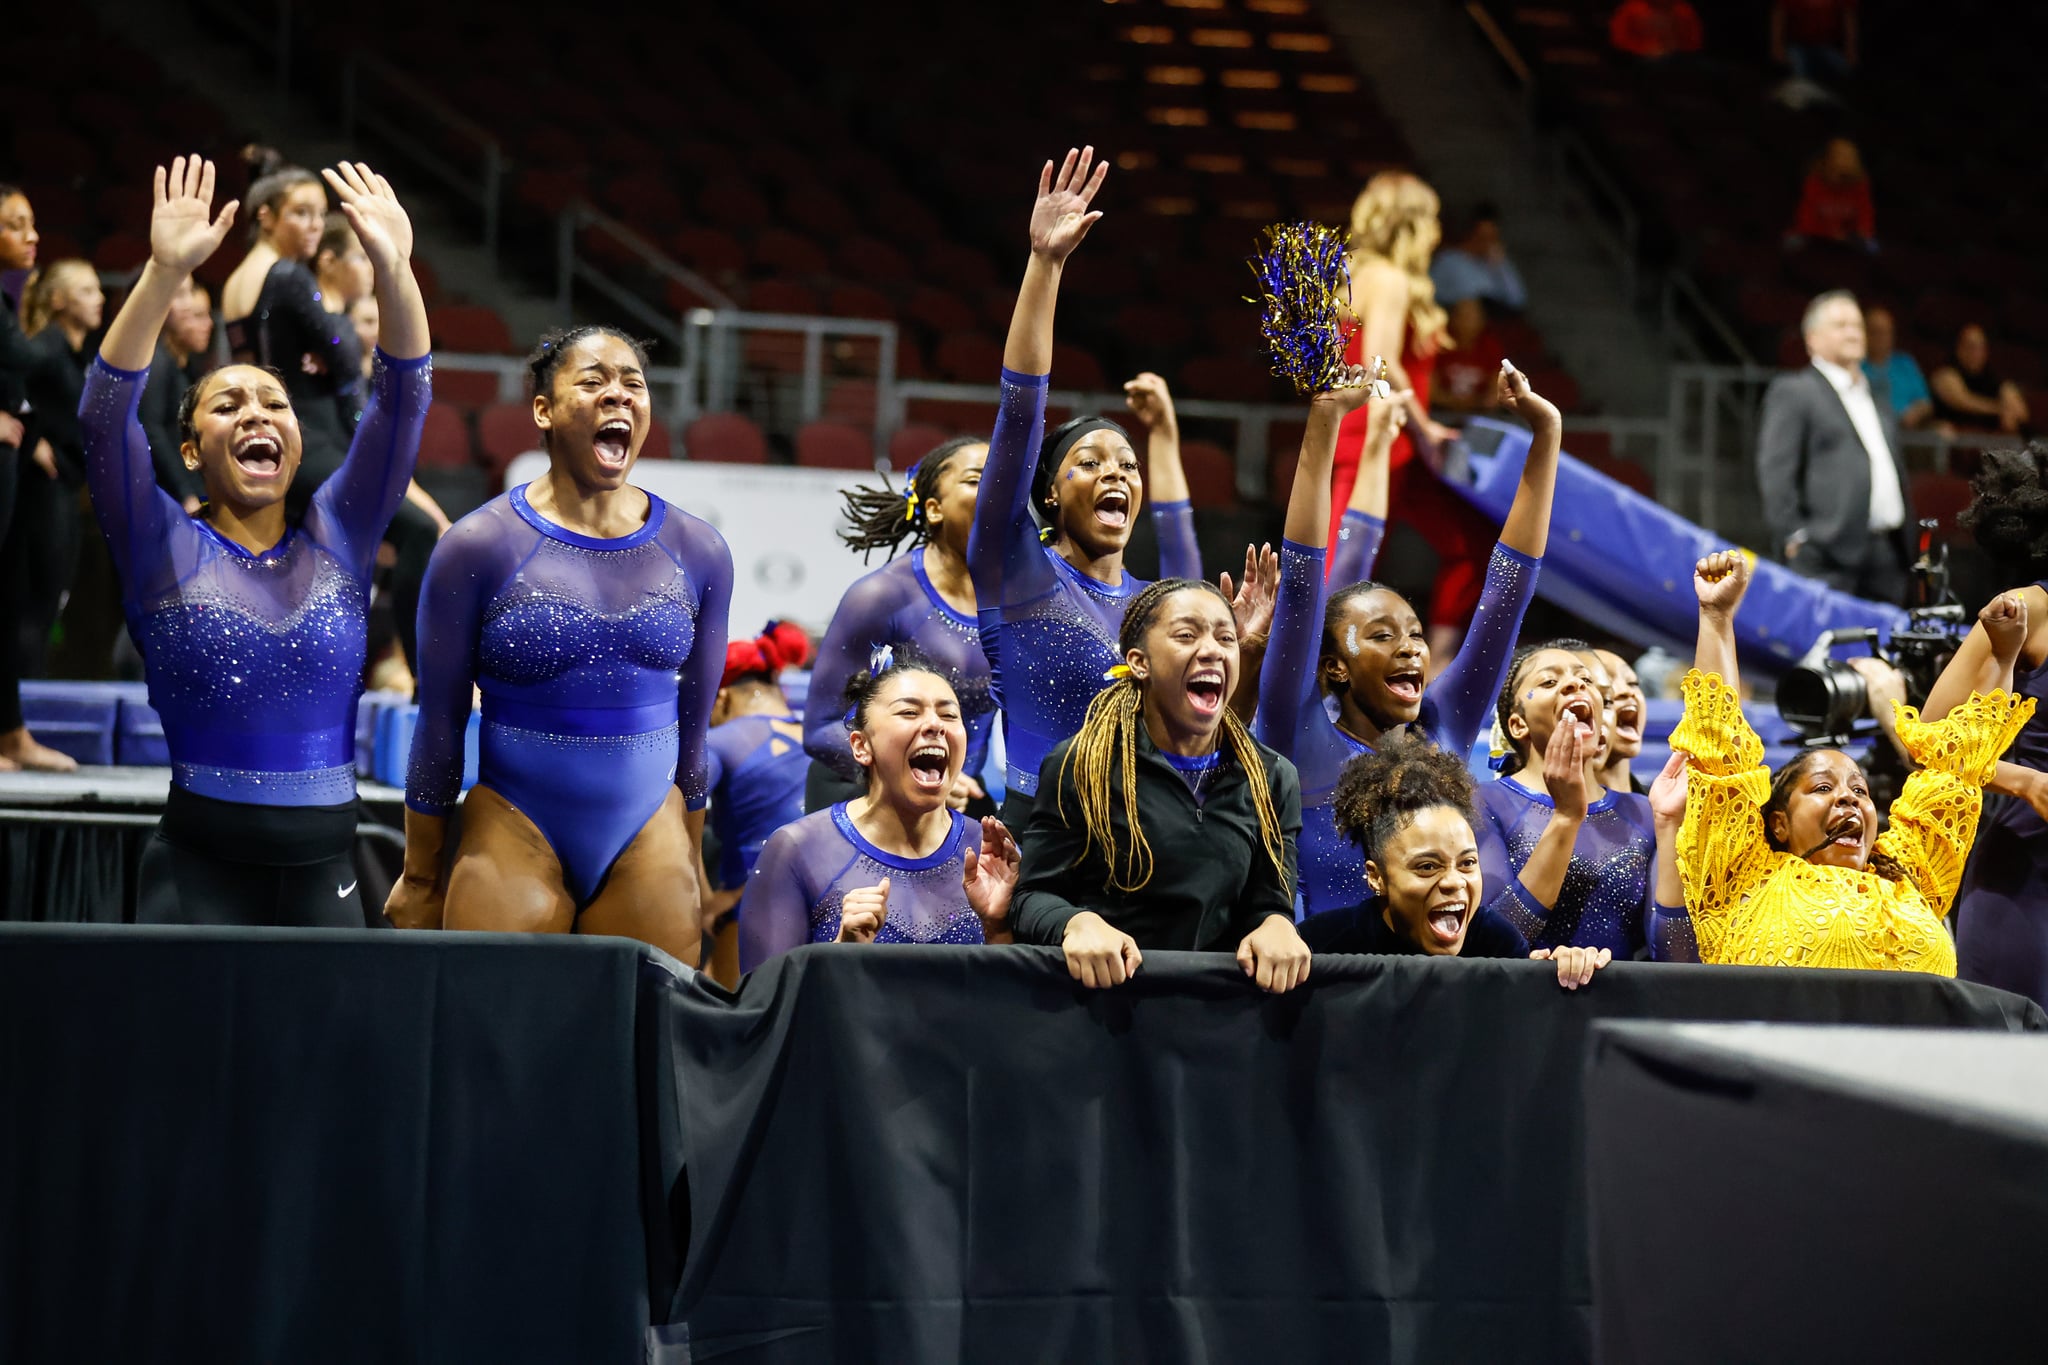 LAS VEGAS, NV - JANUARY 06:  Fisk University gymnasts cheer on their teammate during a meet at the Orleans Arena on January 6, 2023 in Las Vegas, Nevada. (Photo by Stew Milne/Getty Images)